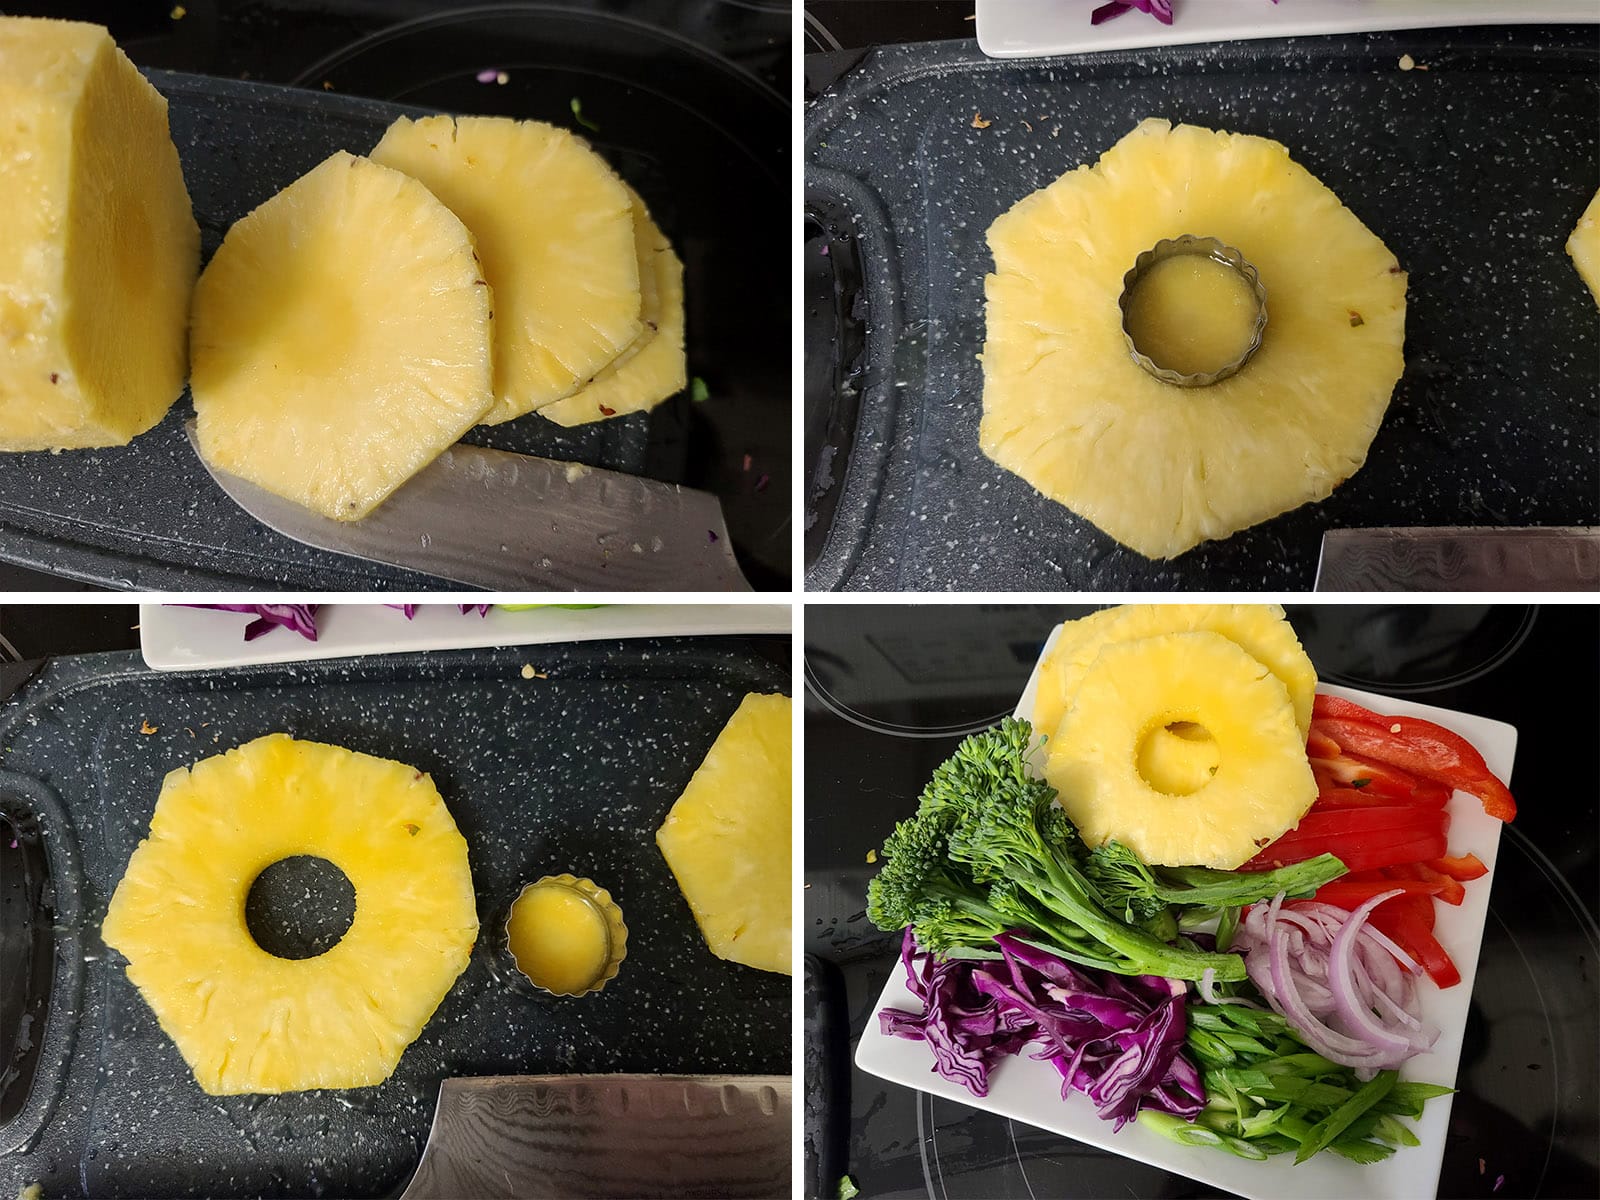 A 4 part image showing a pineapple being sliced, cored, and added to a plate of other vegetables.